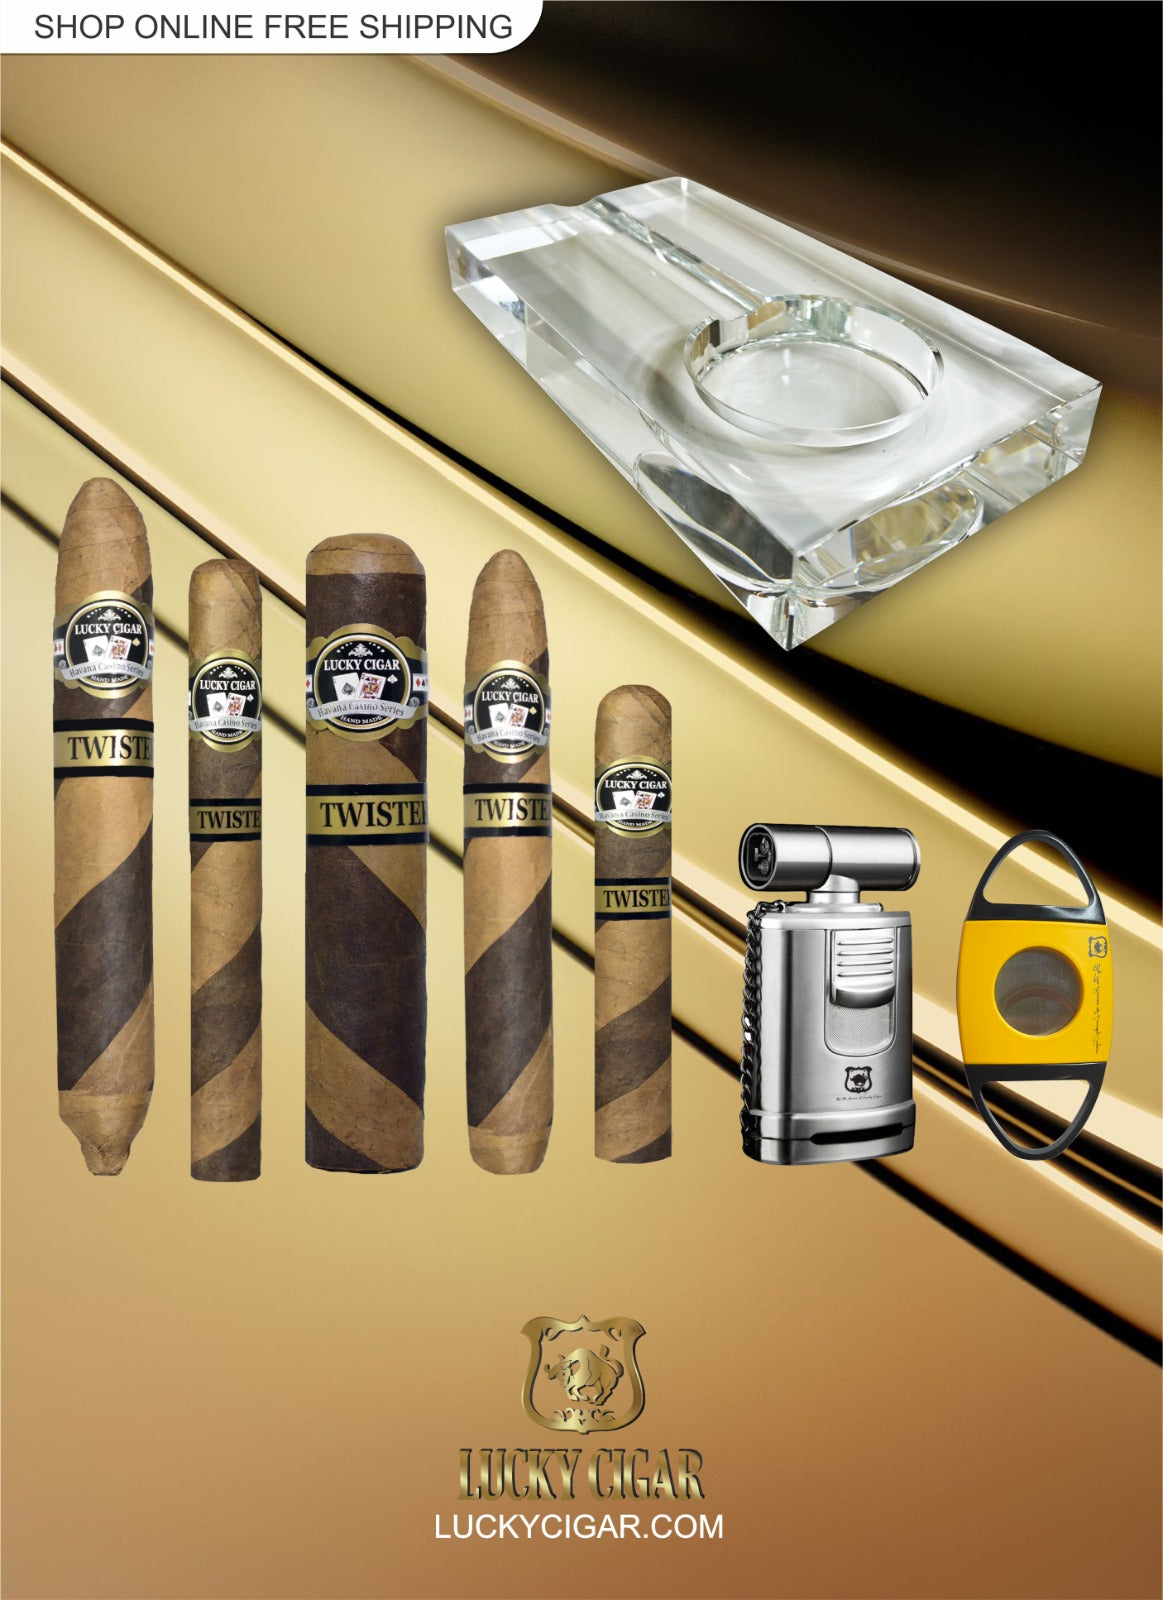 Lucky Cigar Sampler Sets: Set of 5 Twister Cigars with Cutter, Ashtray, Desk Humidor